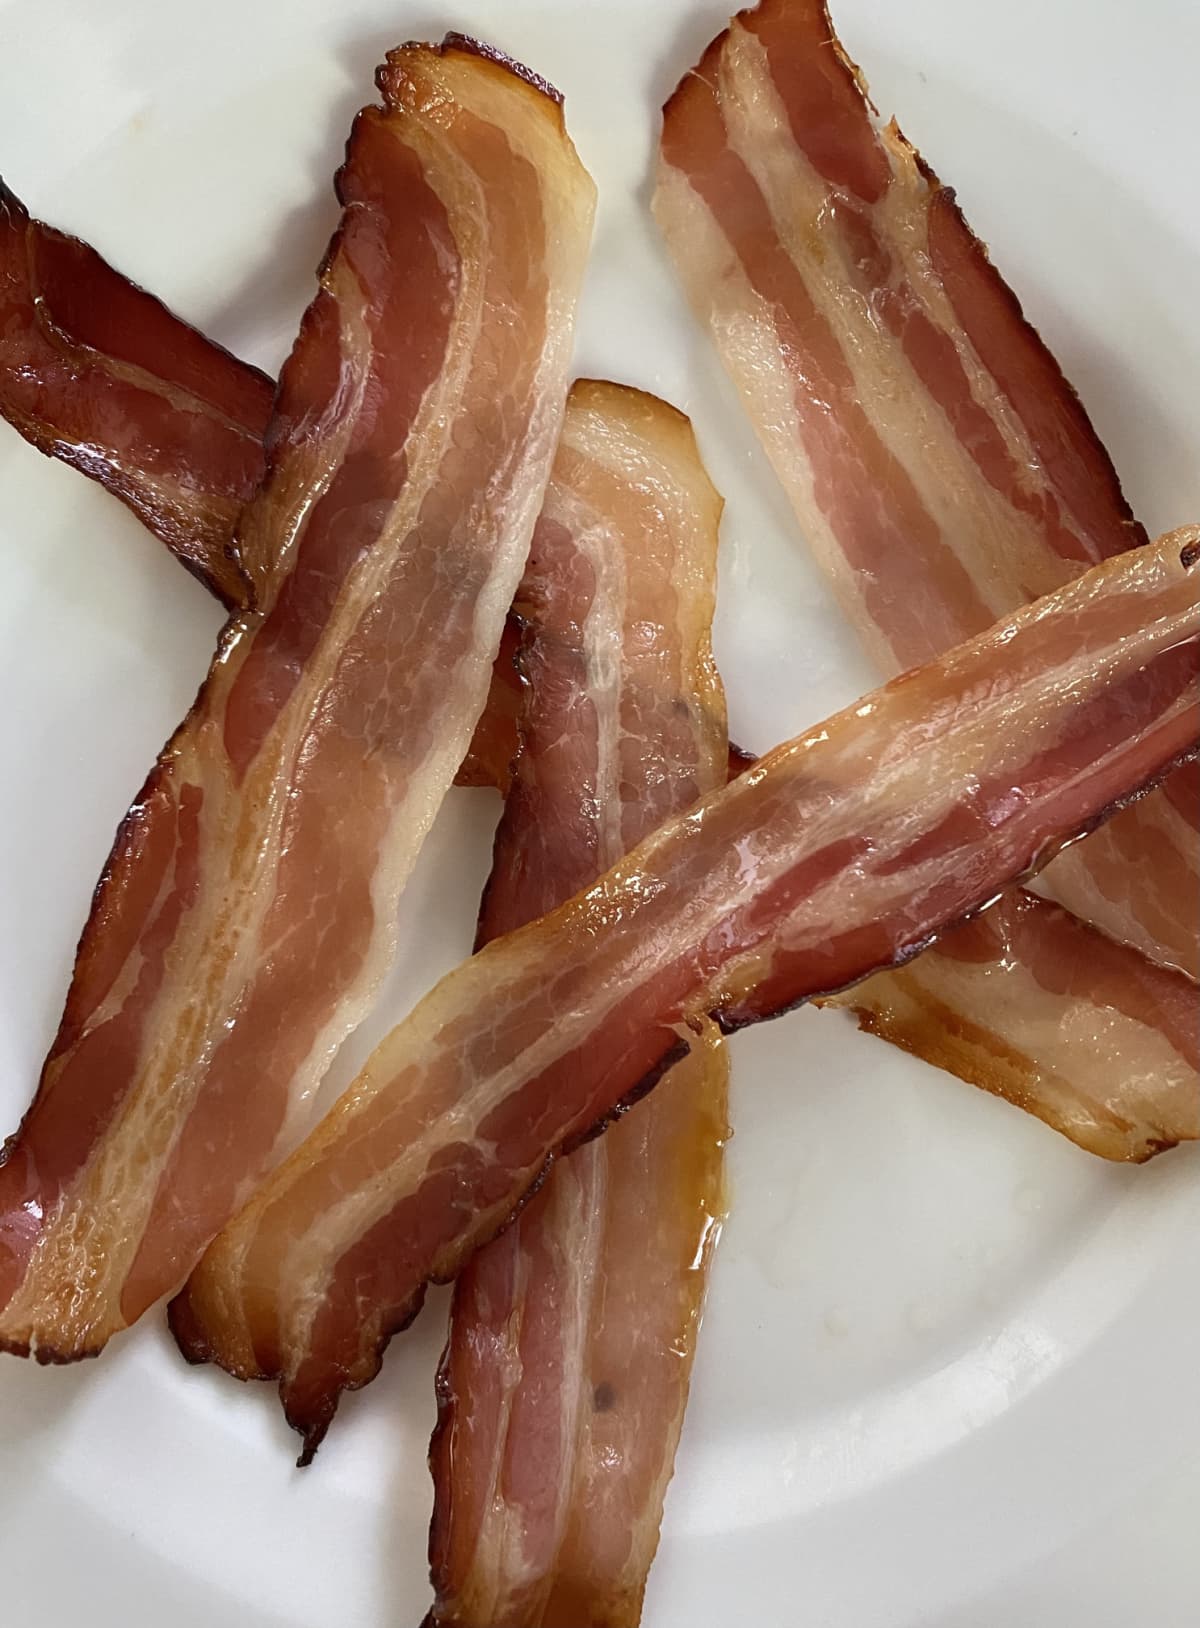 Strips of bacon on a white plate